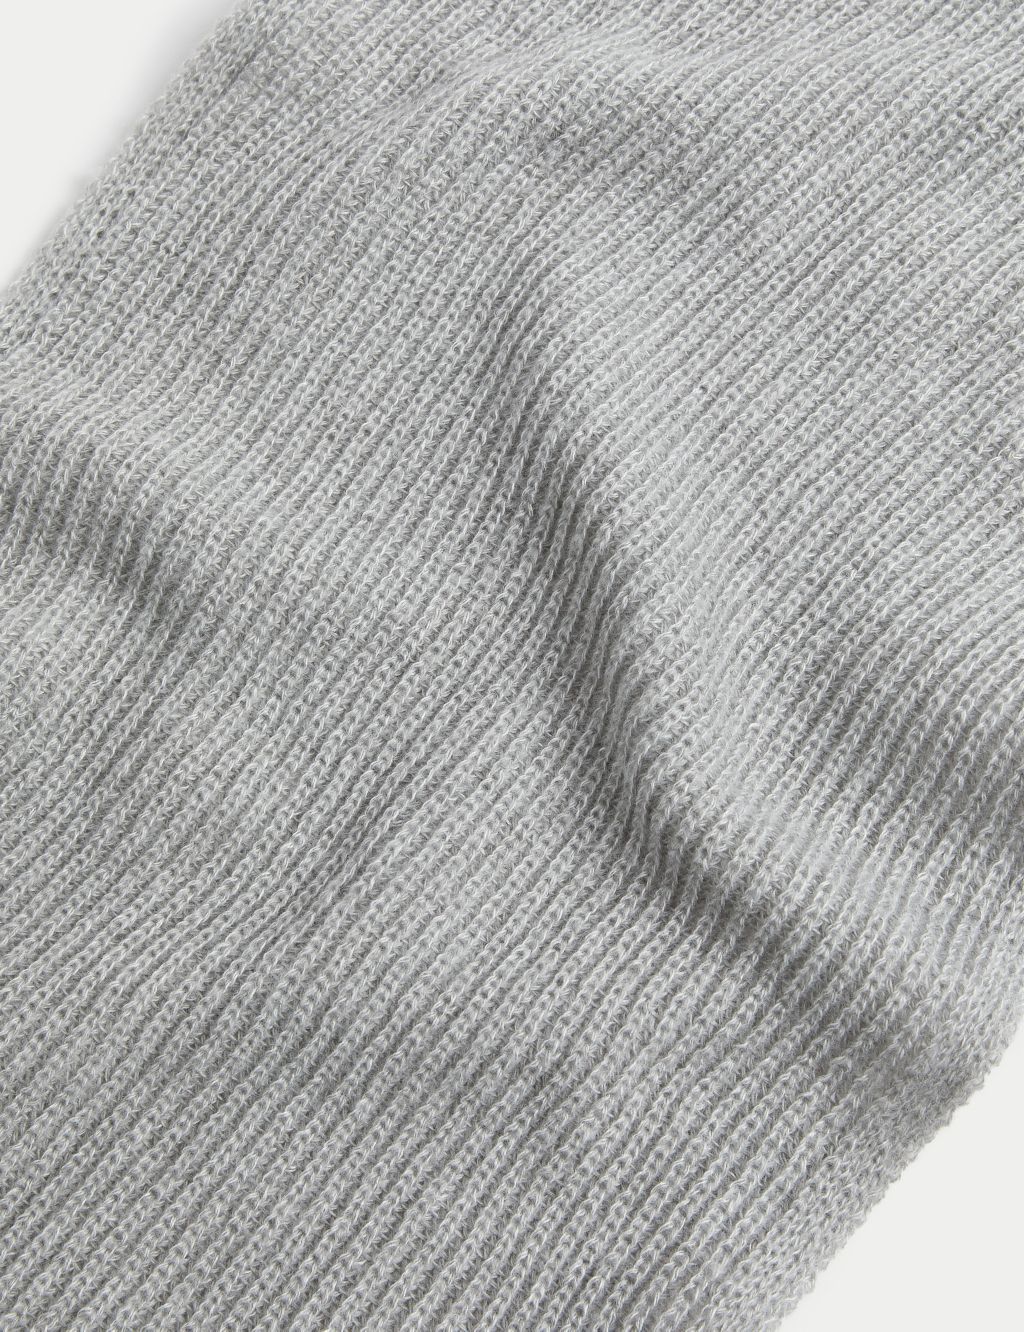 Knitted Ribbed Scarf image 2